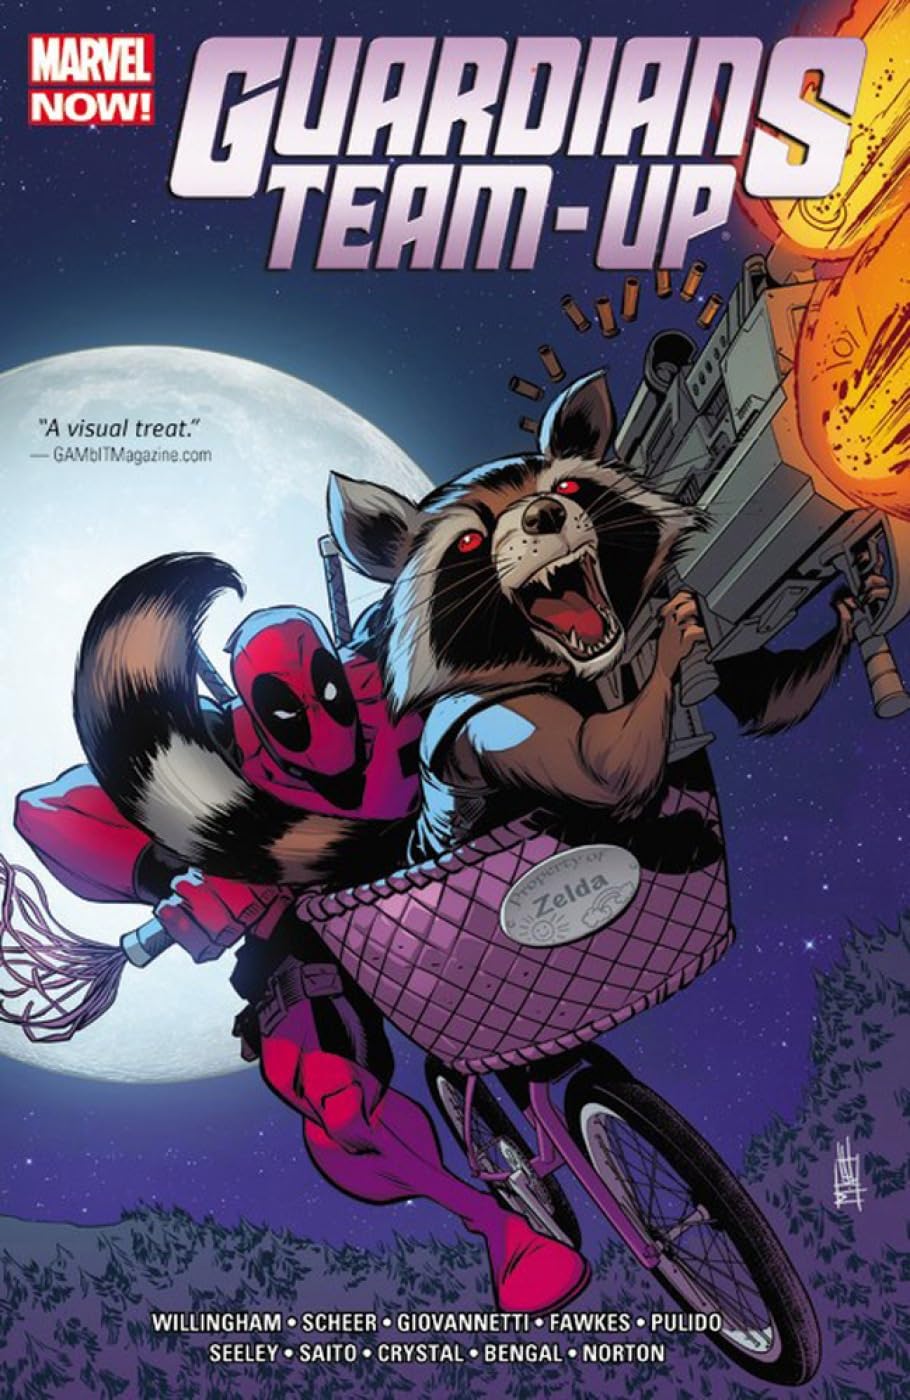 Guardians Team-Up TP VOL 02 UNLIKELY STORY